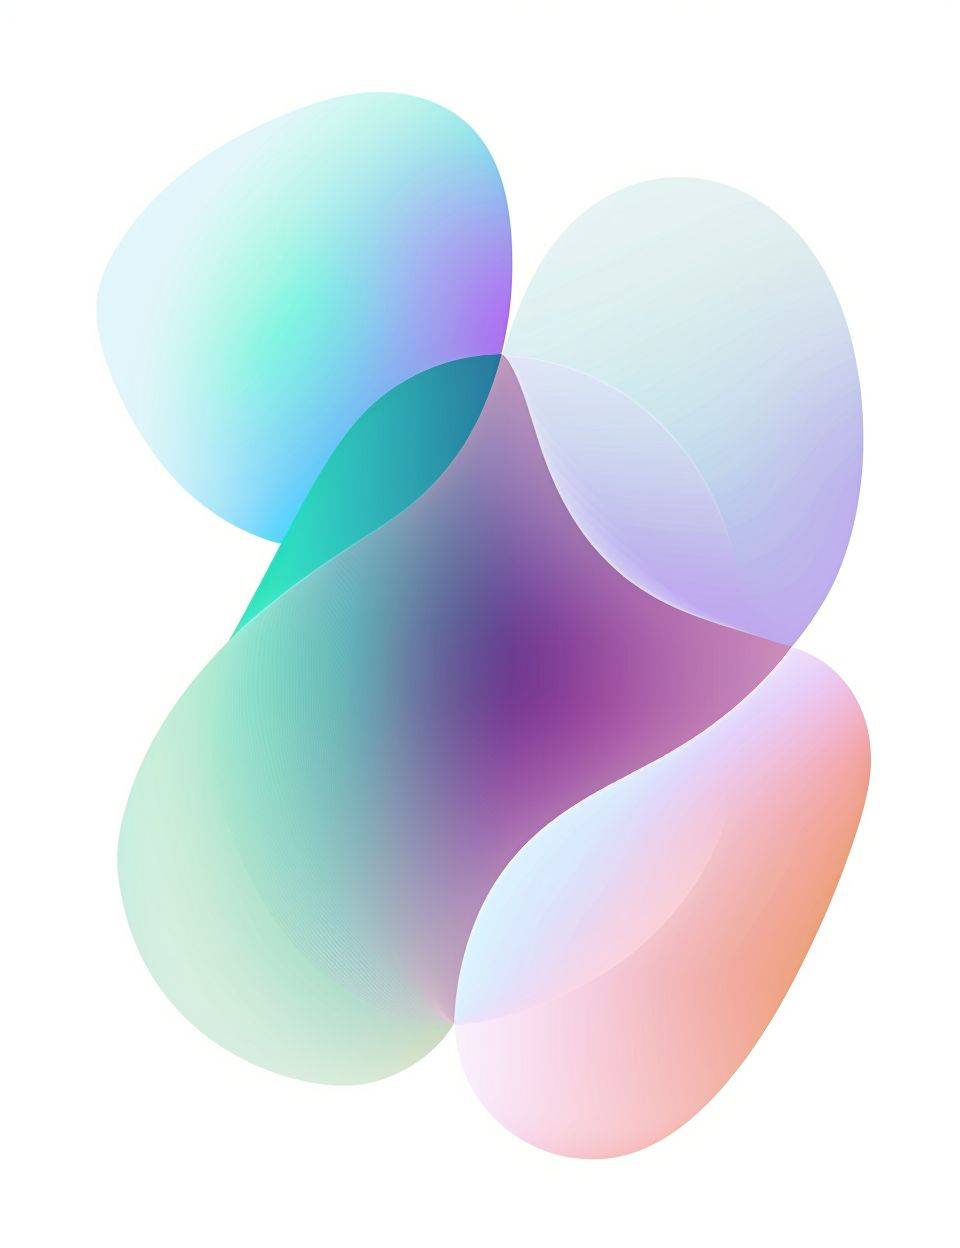 Abstract vector shapes in pastel colors, creating an elegant and modern logo for the Glowing Holographic Gradient. The design features smooth gradients of purple, blue, pink, and green, giving it a soft yet vibrant appearance. It includes large, rounded forms that suggest fluidity or movement, complemented by subtle text in the style of 'bi compilation' at one side. This composition creates a harmonious balance between simplicity and color vibrancy, making it suitable as a brand name symbol.